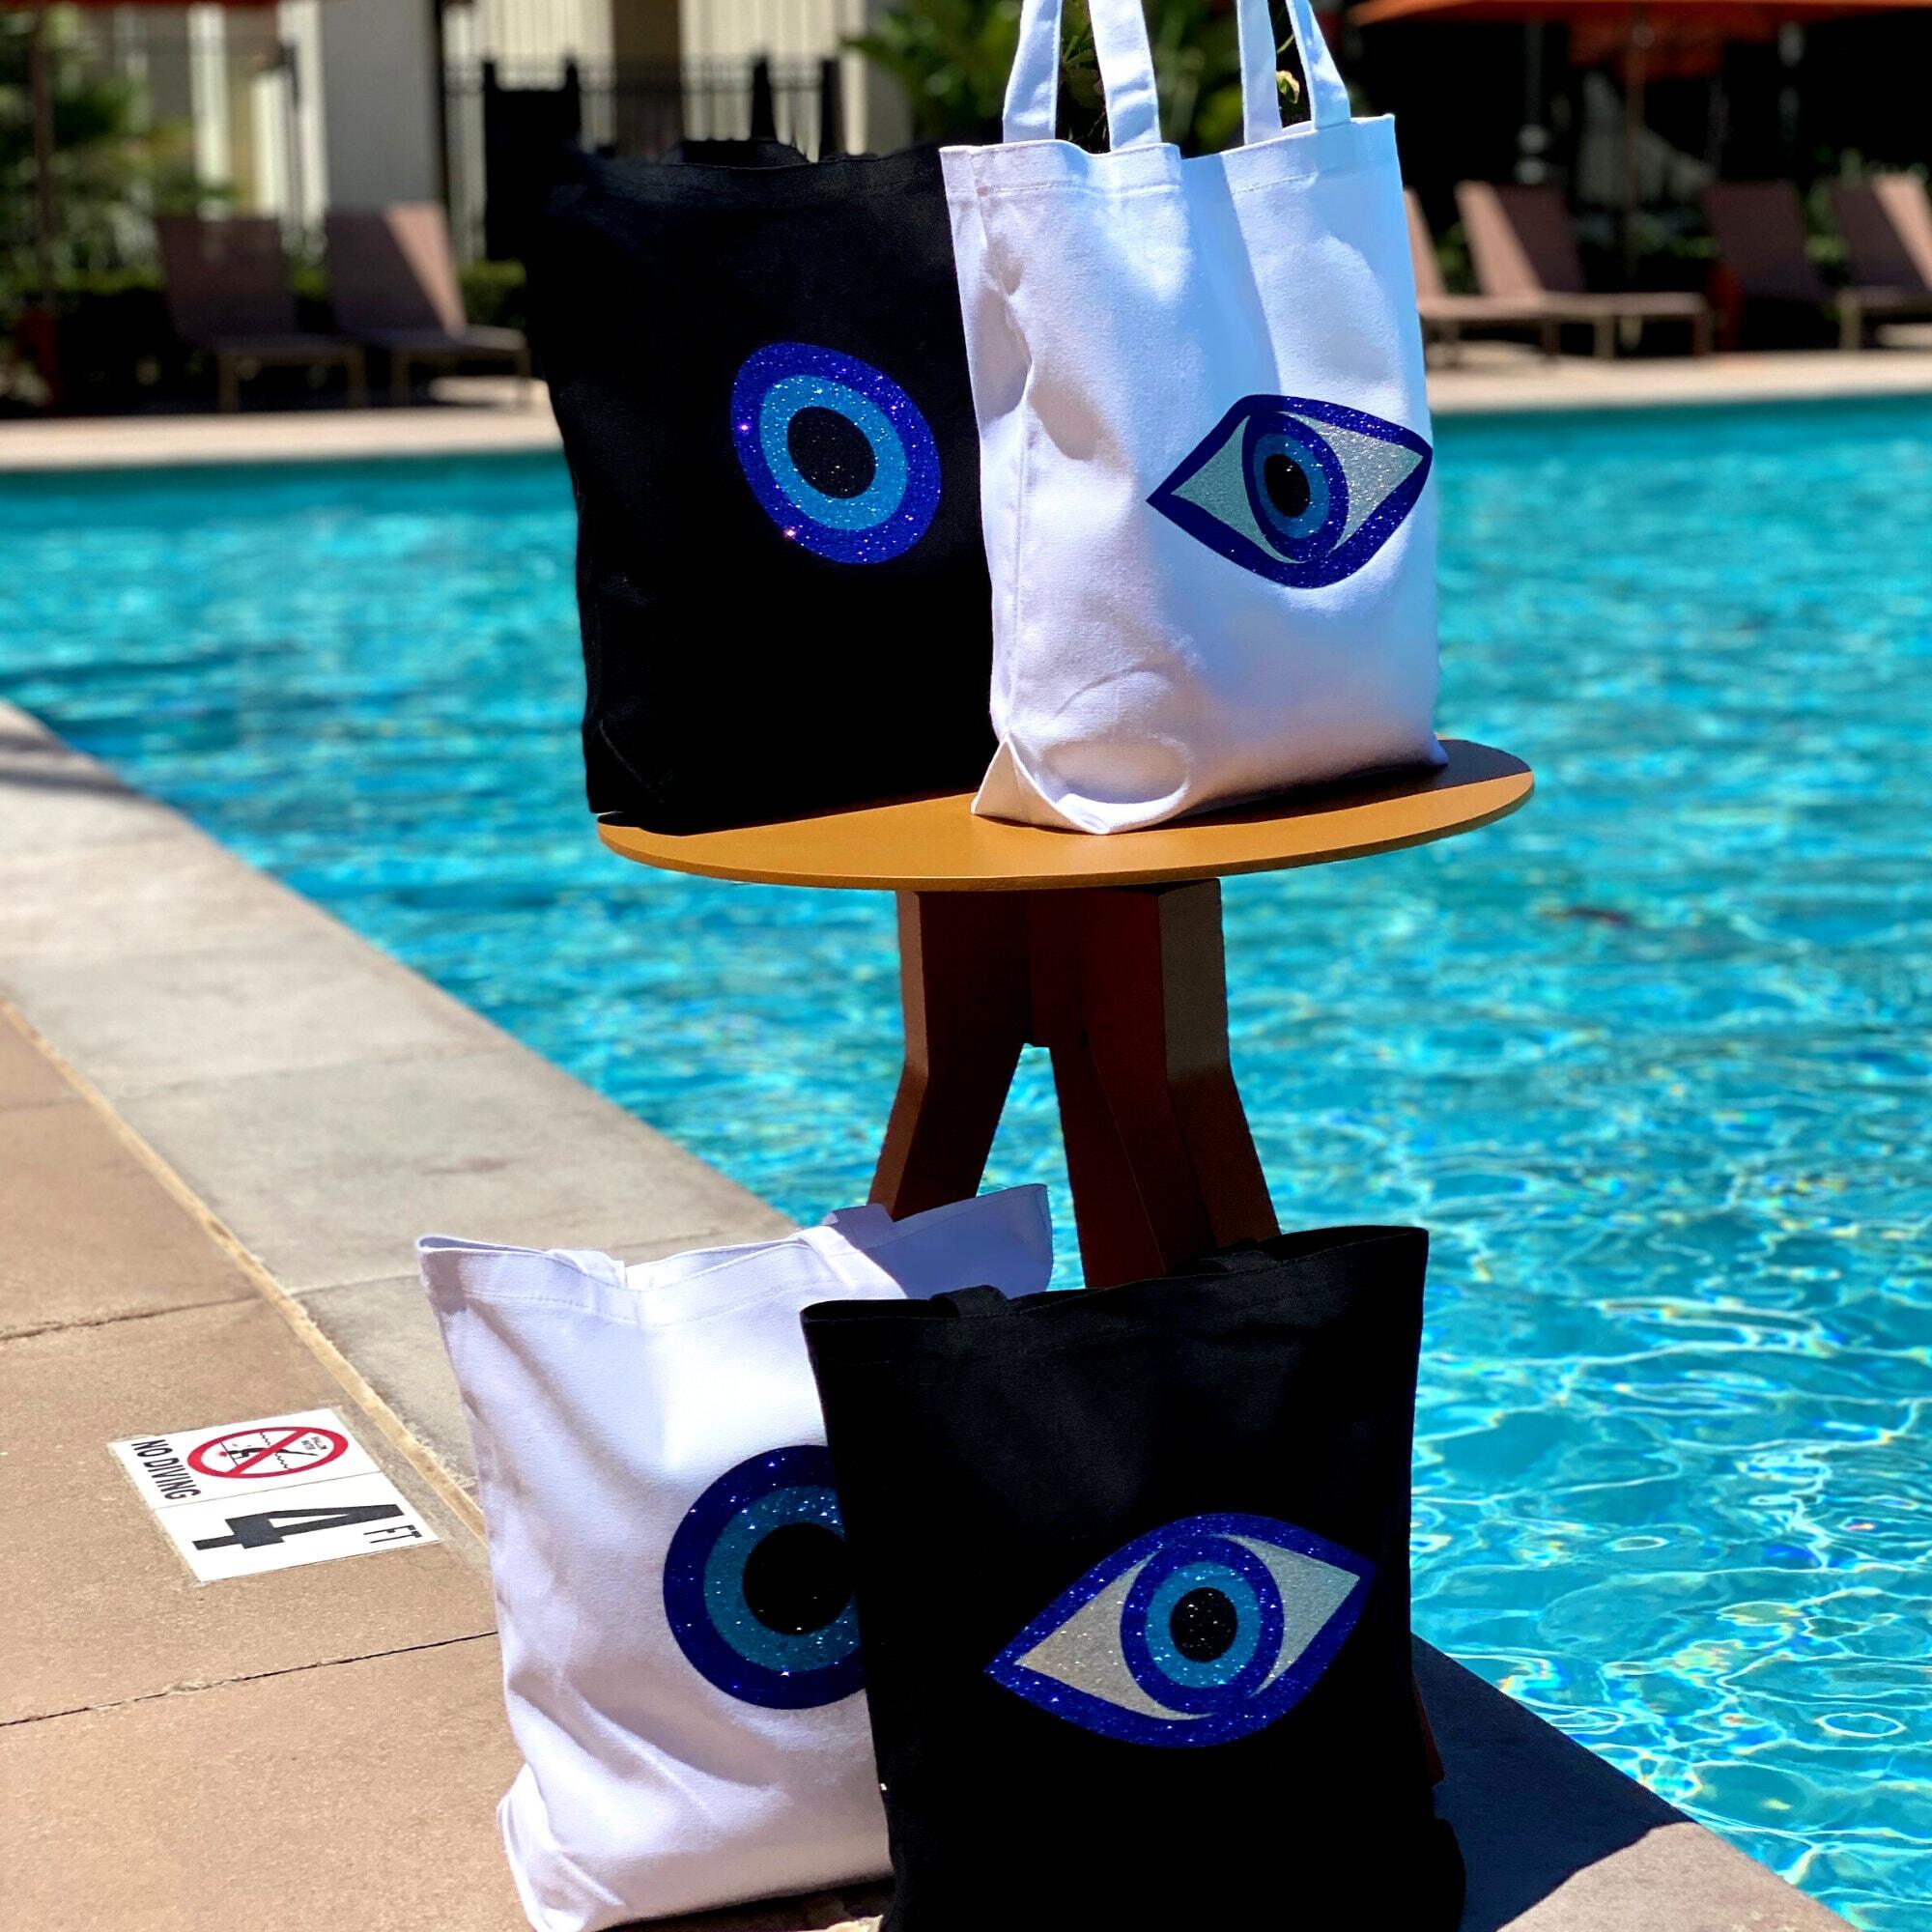 Clothing & Accessories :: Bags & Purses :: Shoulder :: Canvas Tote Bag,  Glitter Patches, Evil Eye Bag, Summer Bag for Women, Eye Glitter Patches,  Good Luck Gifts, Grocery Bag, Gift For Her